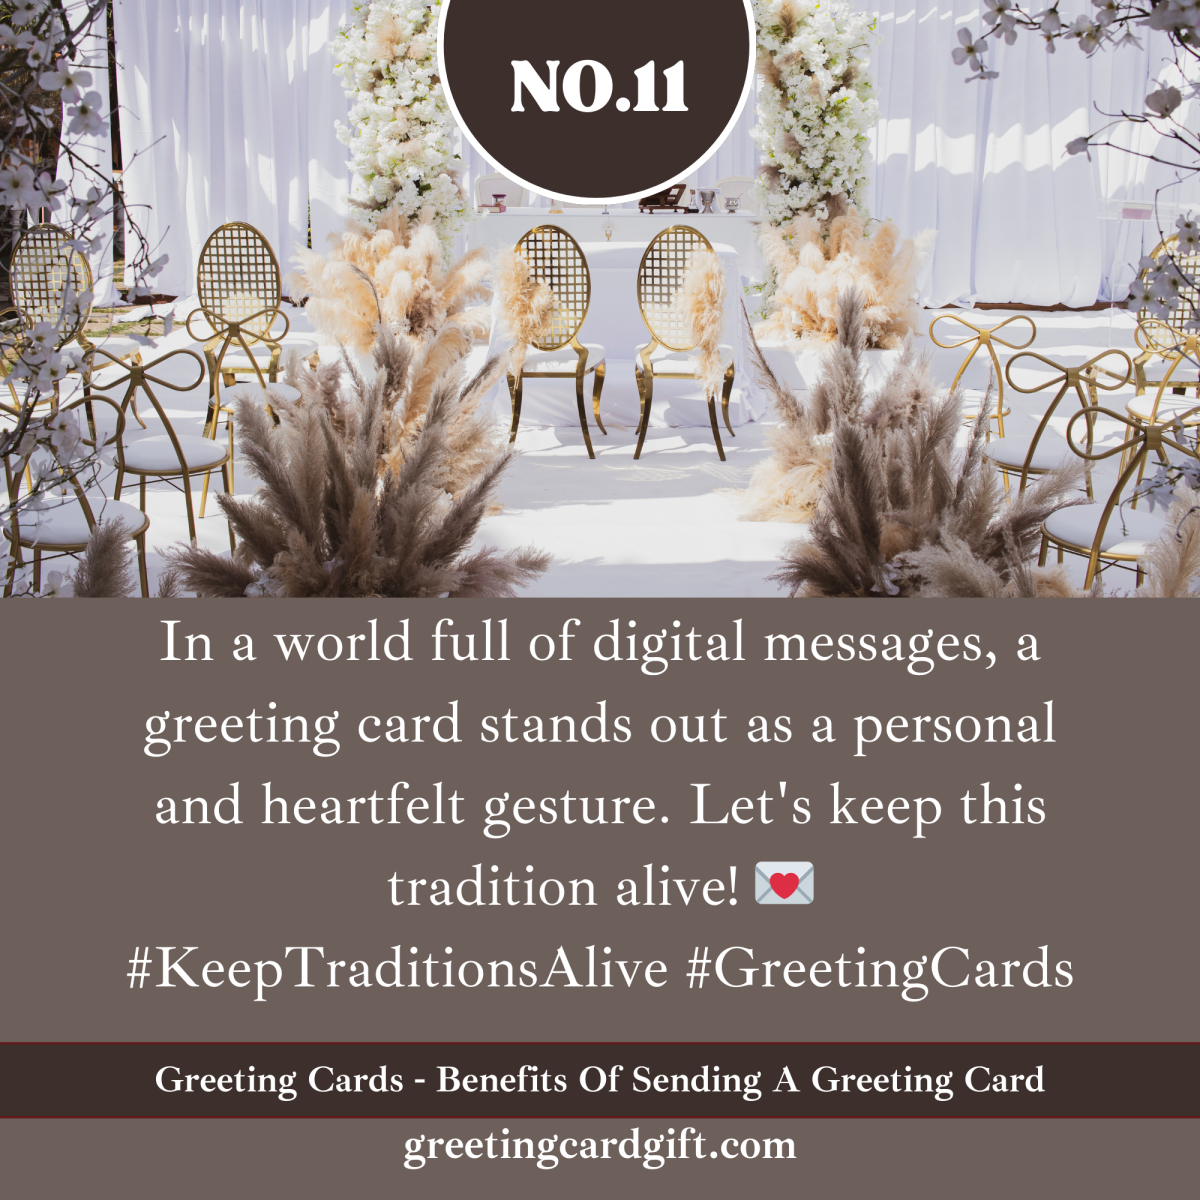 Greeting Cards – Benefits Of Sending A Greeting Card No.11